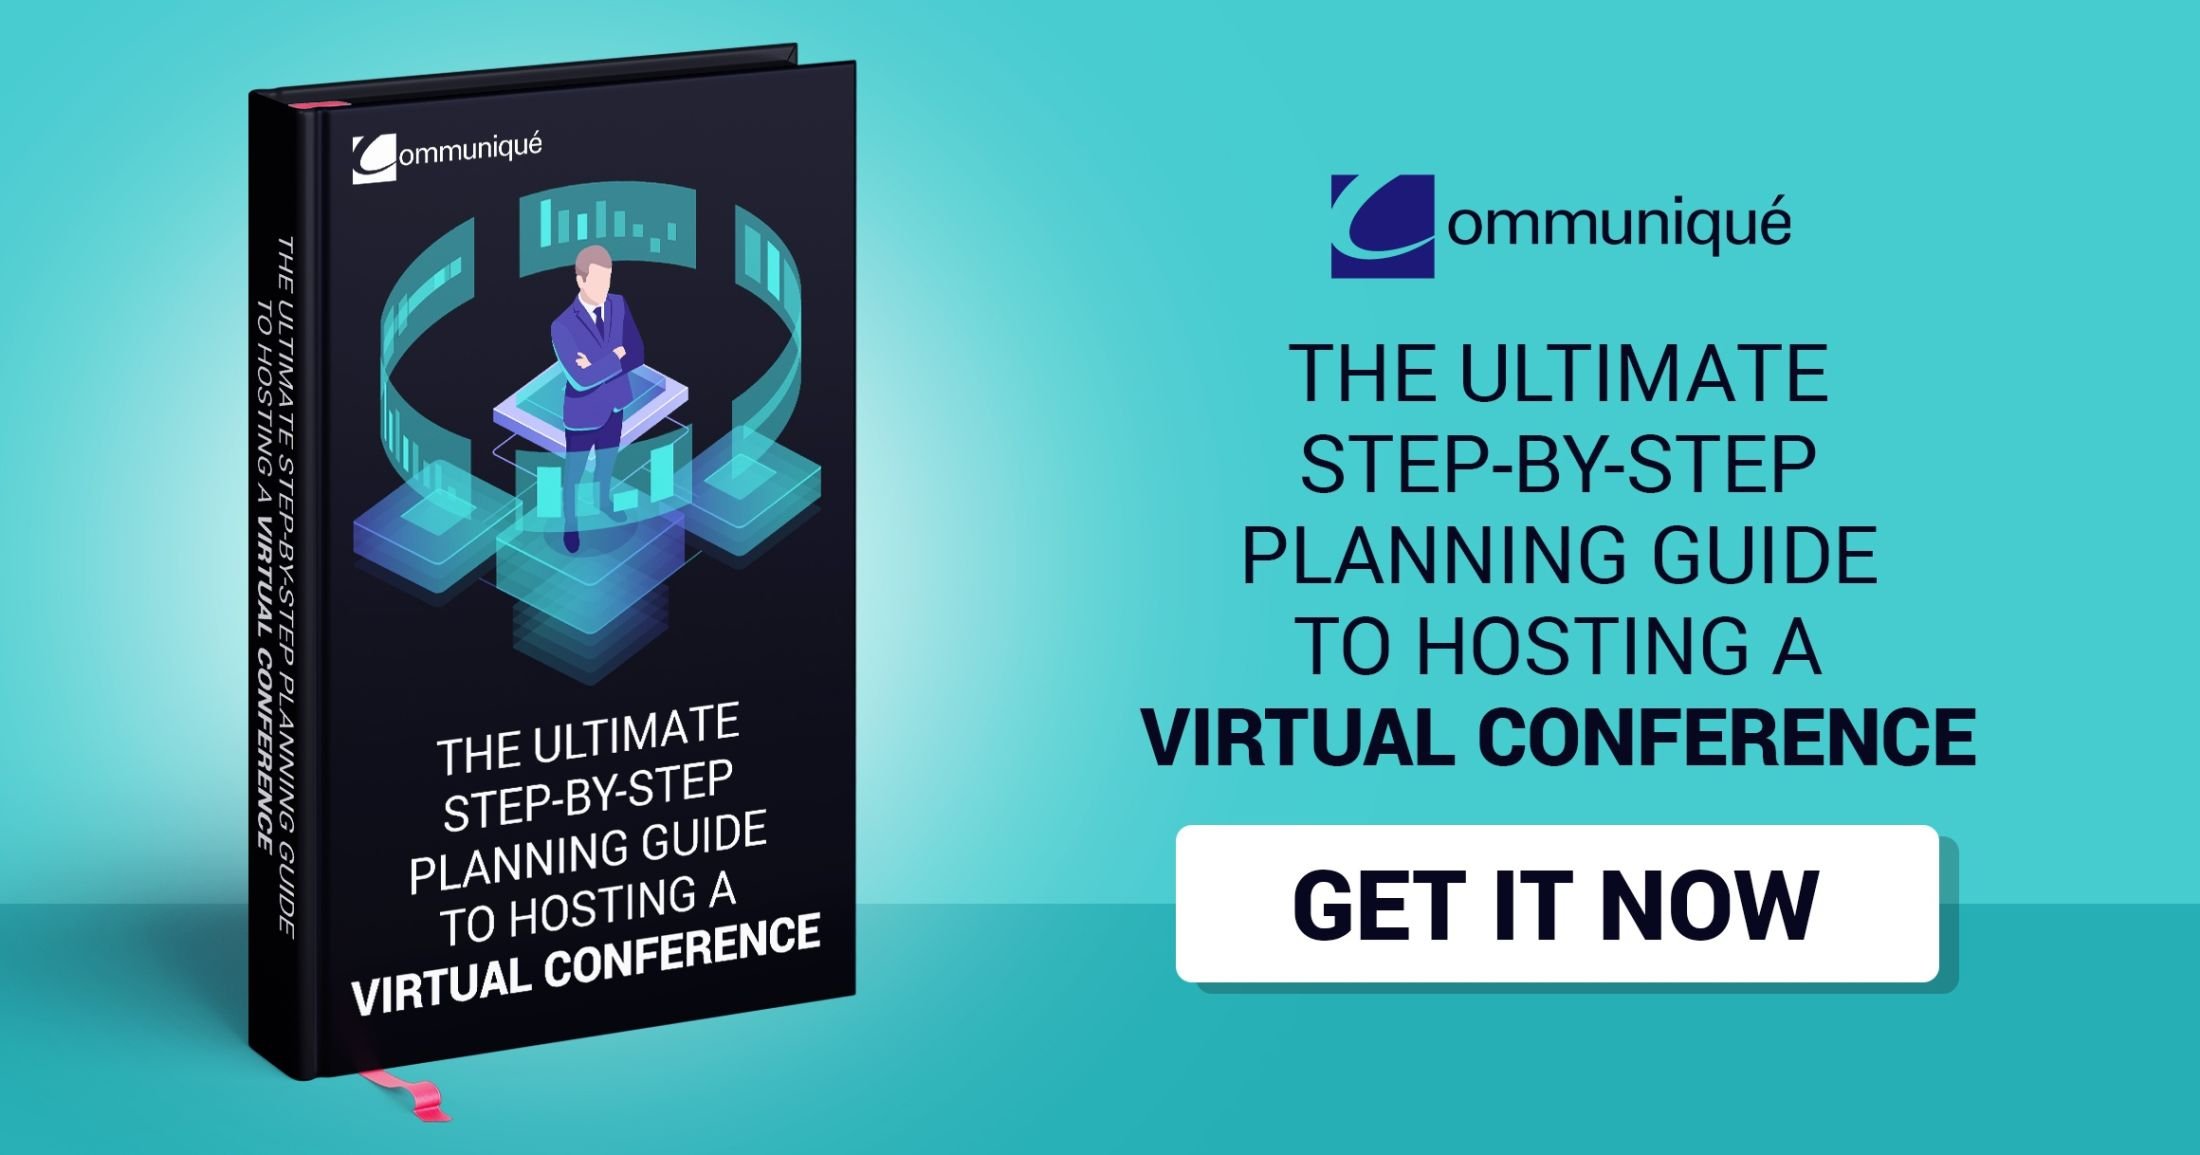 How to host a virtaul conference